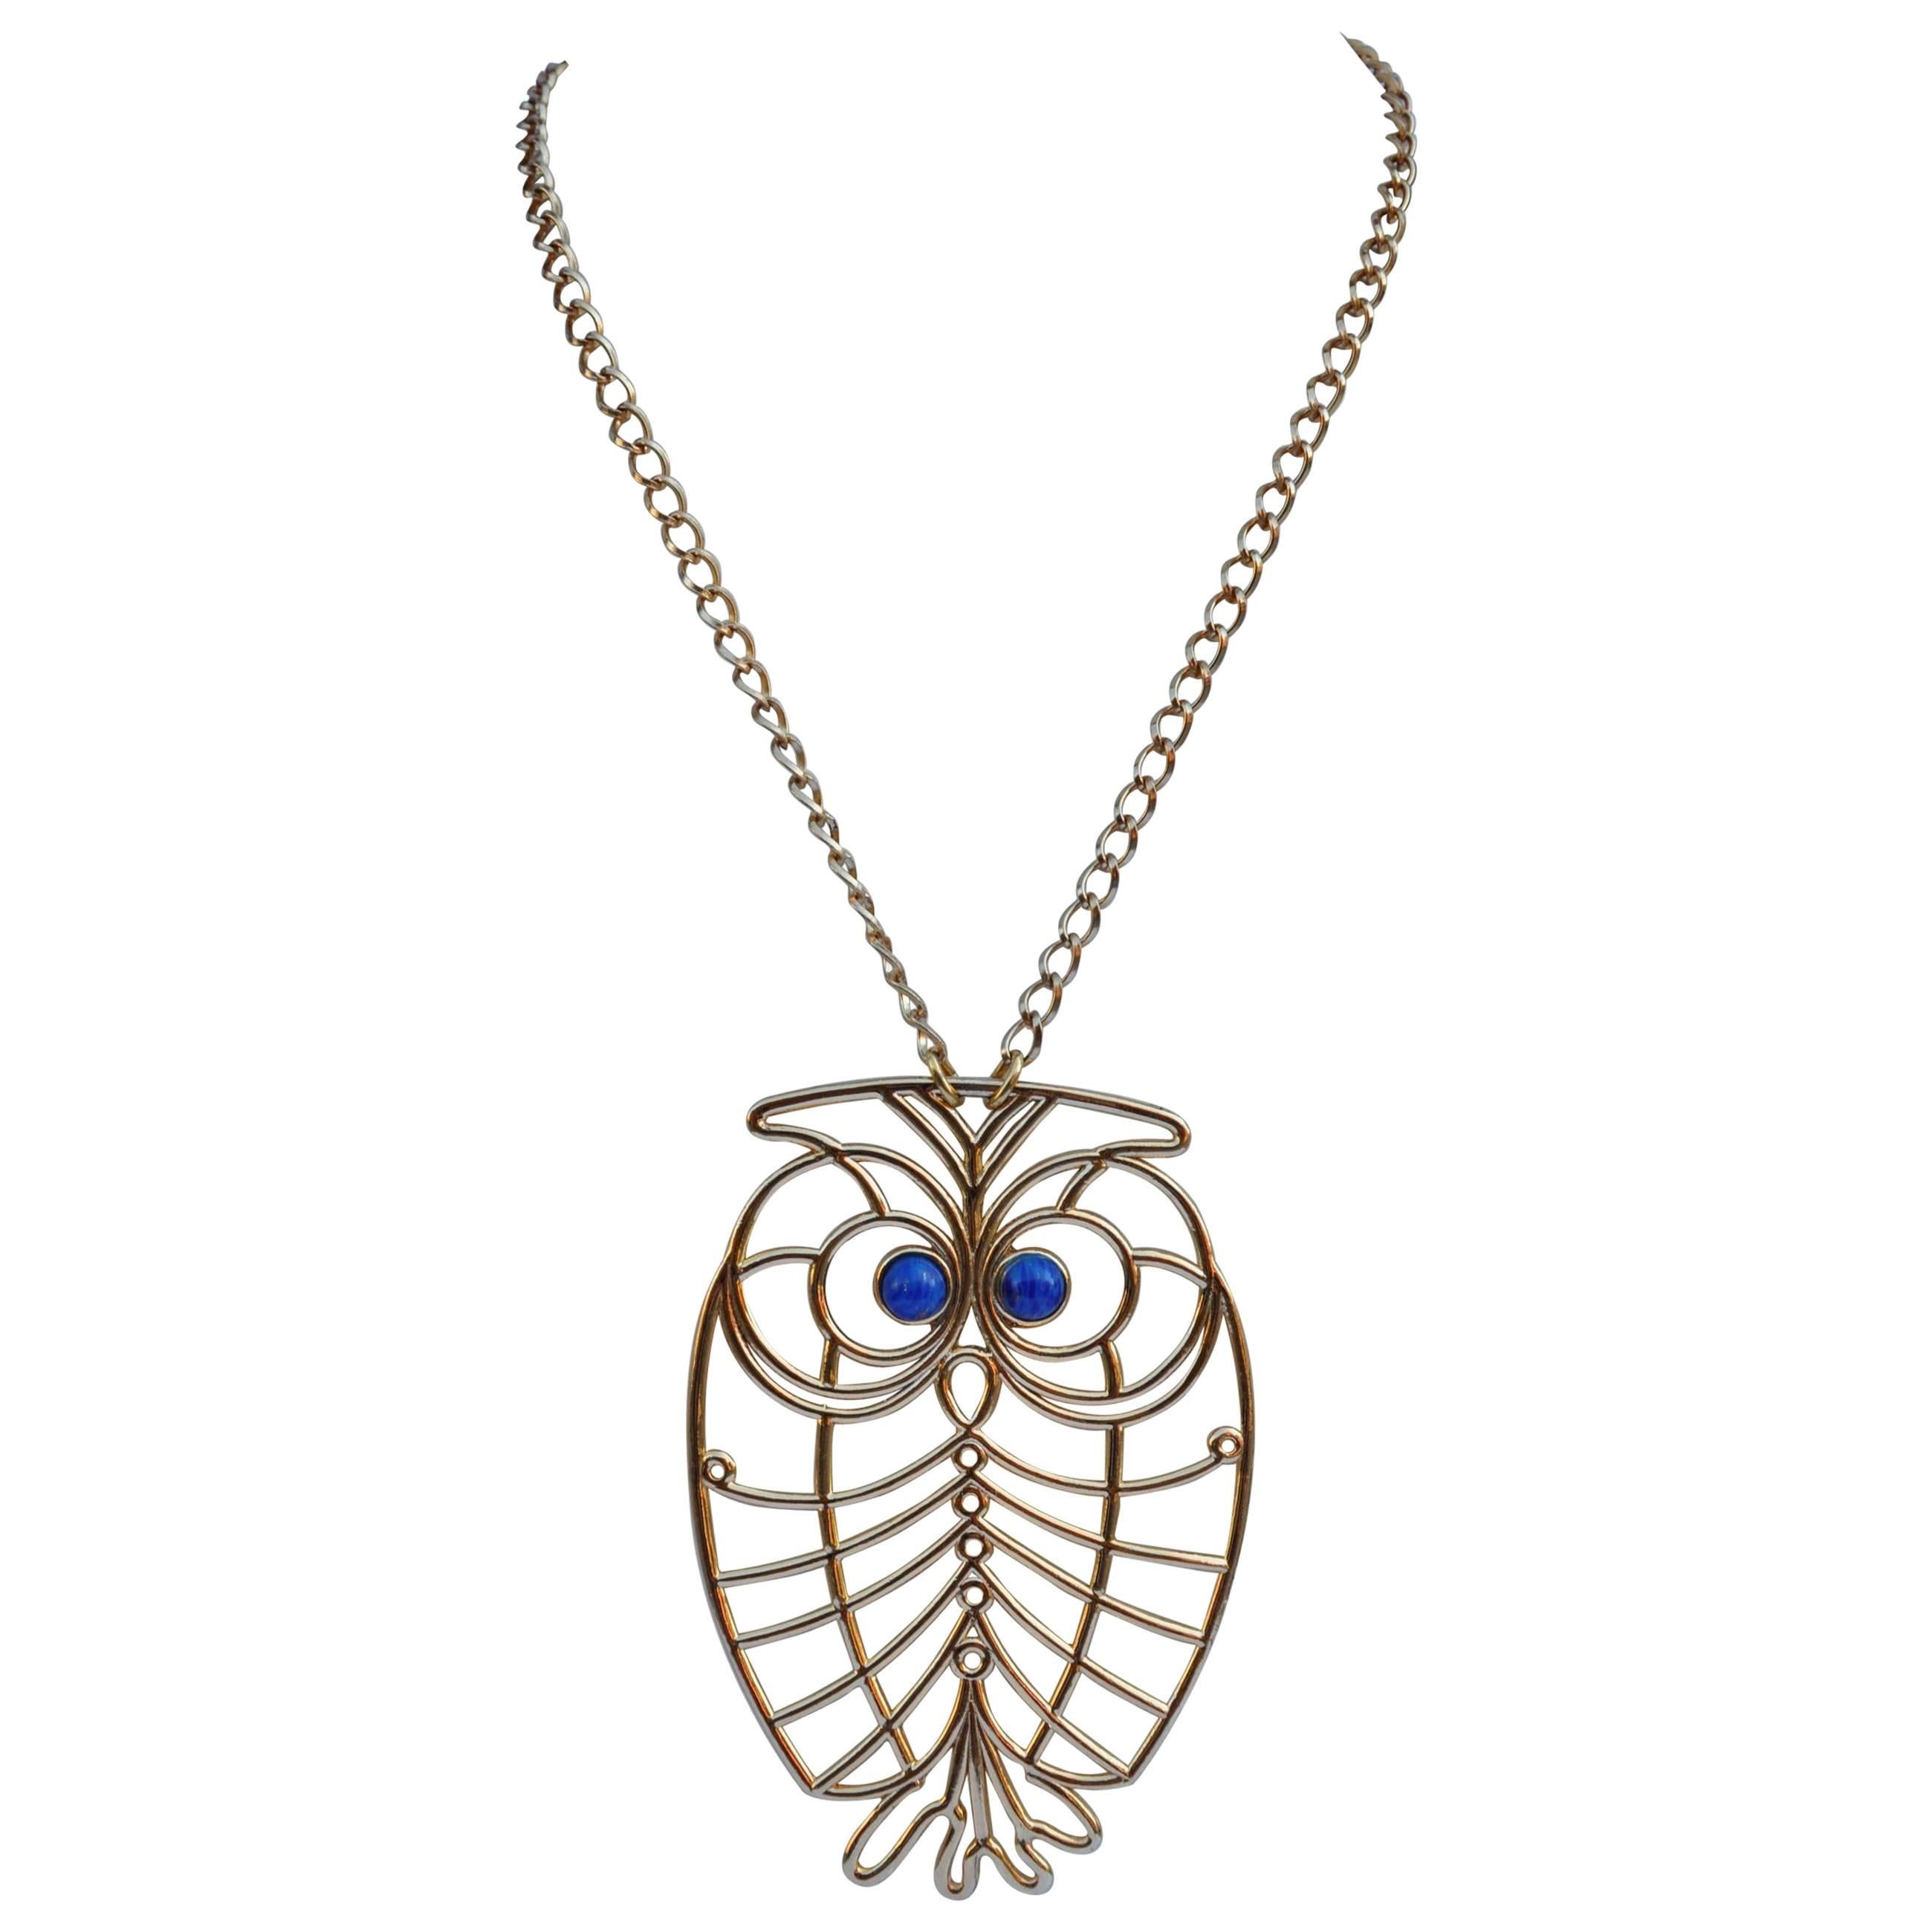 Huge Napier "Owl" Gold Tone Pendant with Necklace